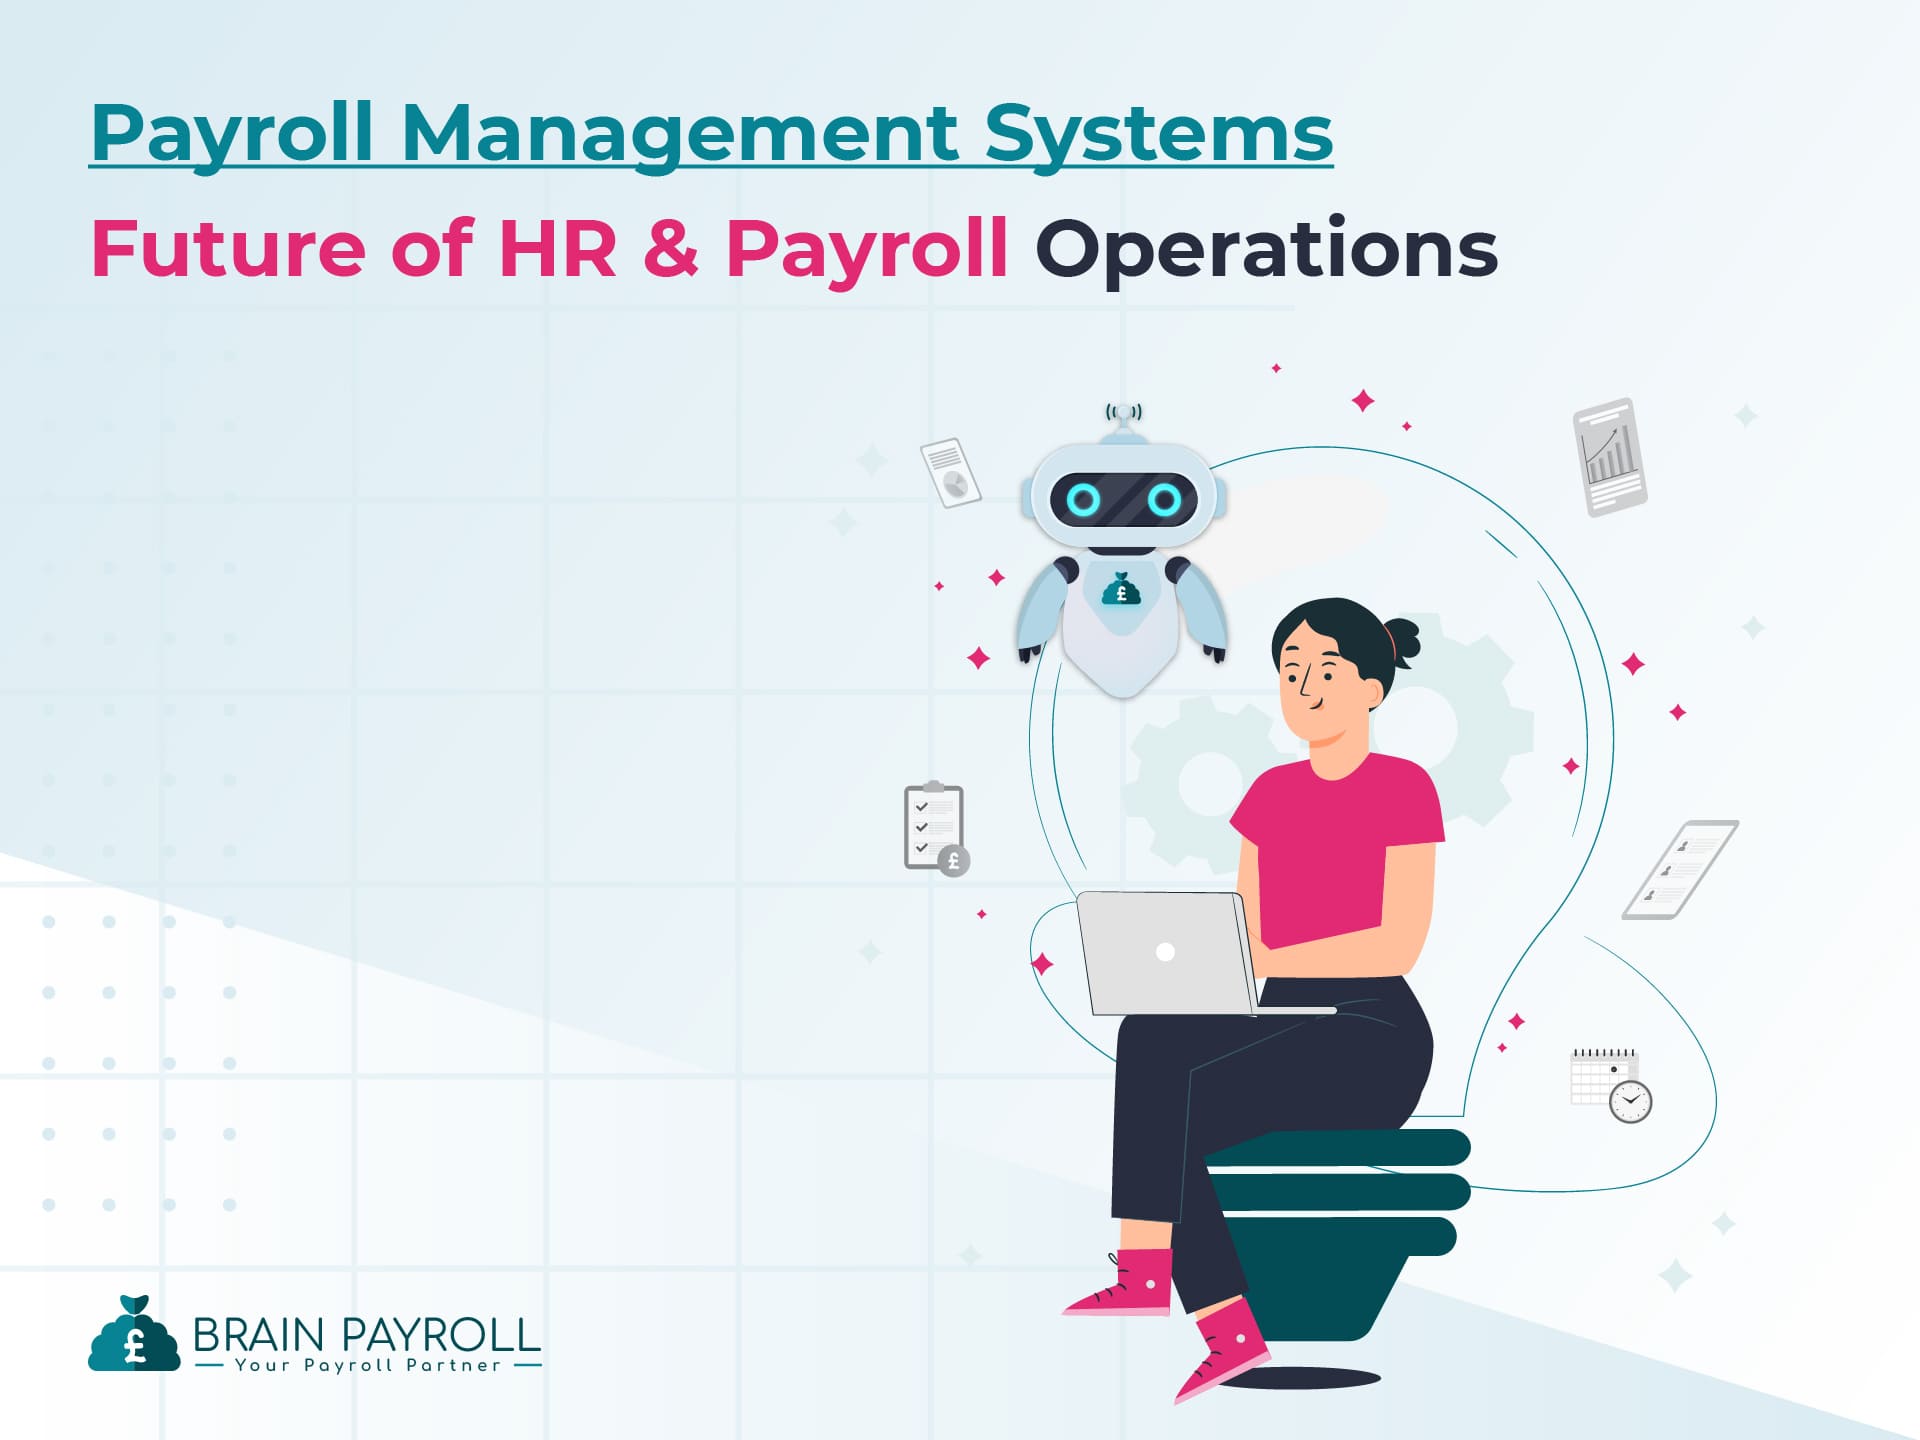 Payroll Management Systems: The Future of HR and Payroll Operations